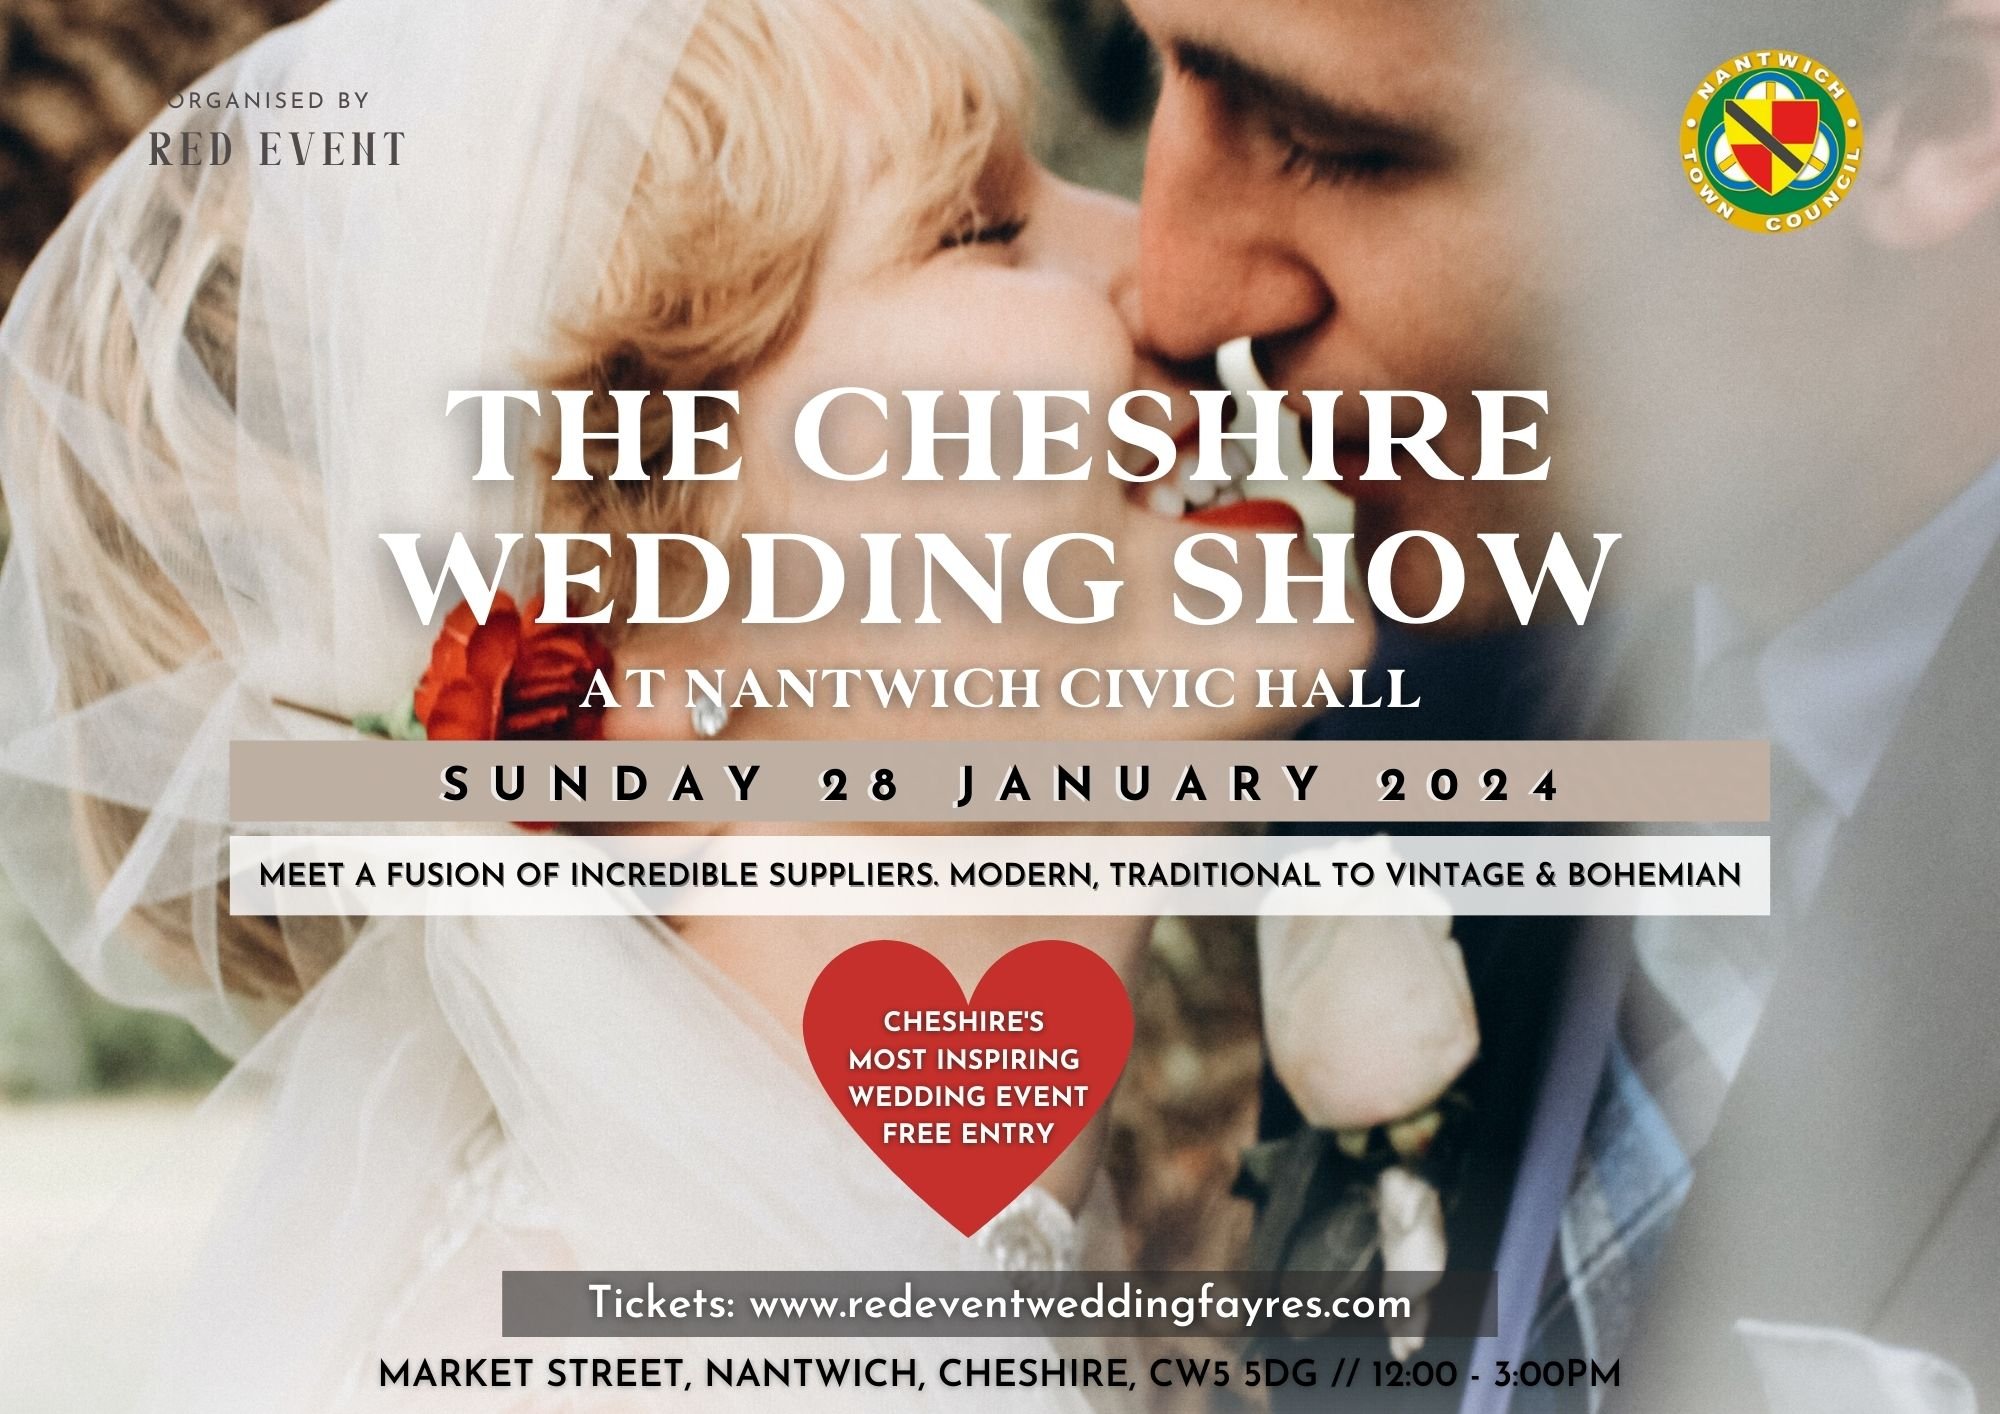 The Cheshire Wedding Fayre at Nantwich Civic Hall Sunday 28th January 2024